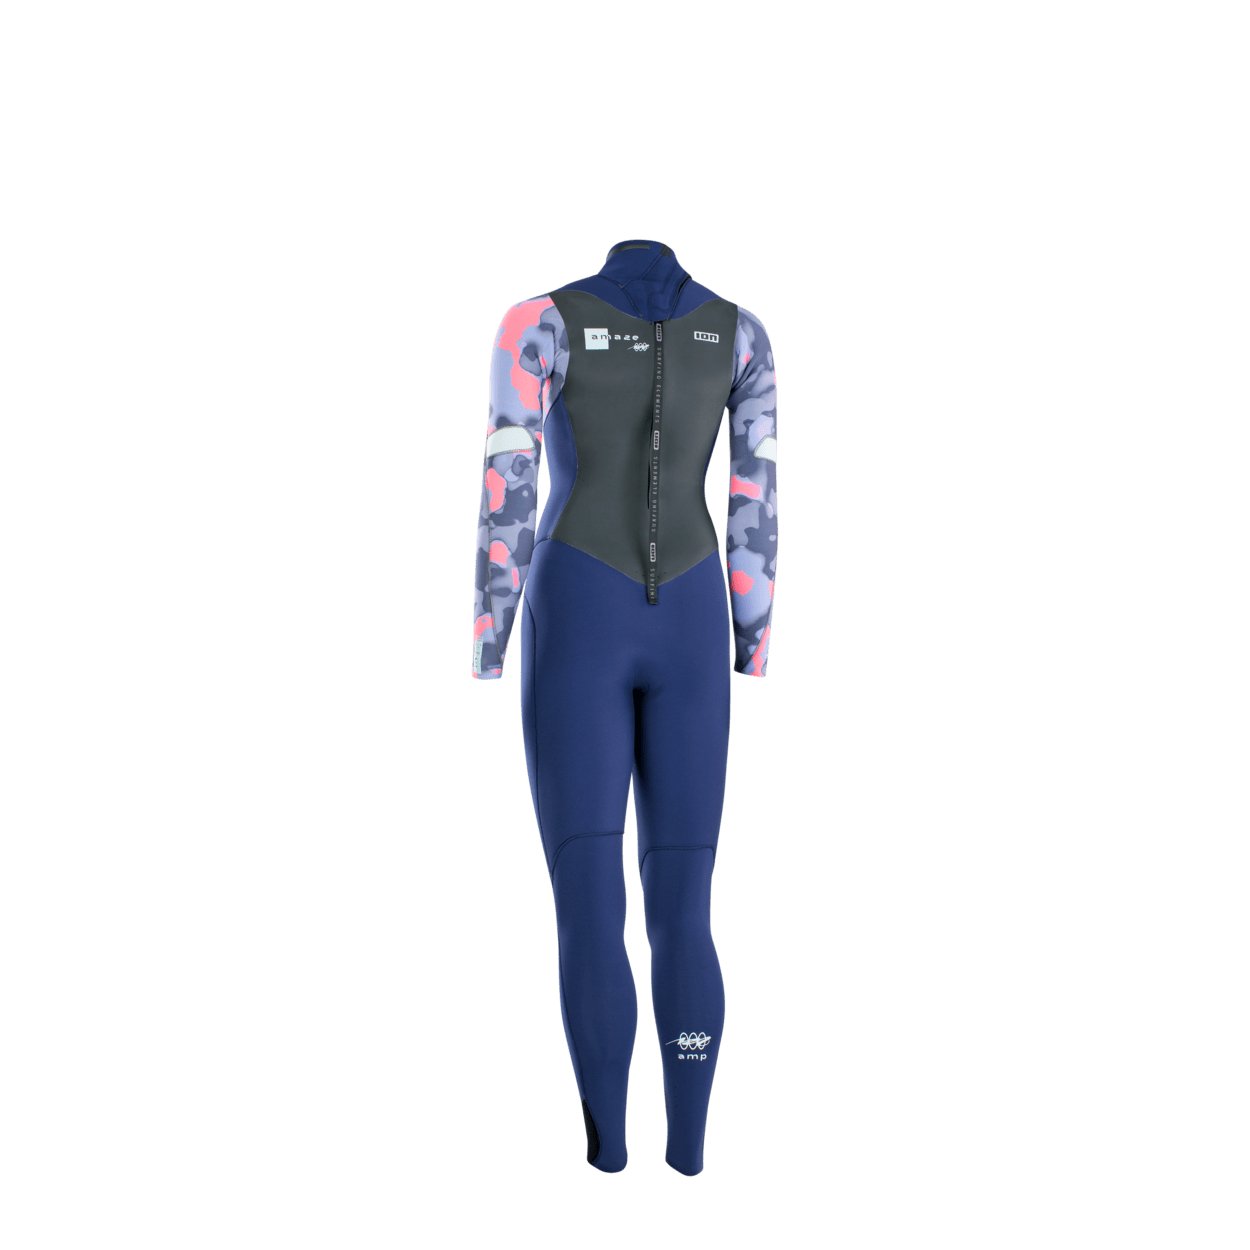 ION Women Wetsuit Amaze Amp 5/4 Back Zip 2023 - Worthing Watersports - 9010583057460 - Wetsuits - ION Water